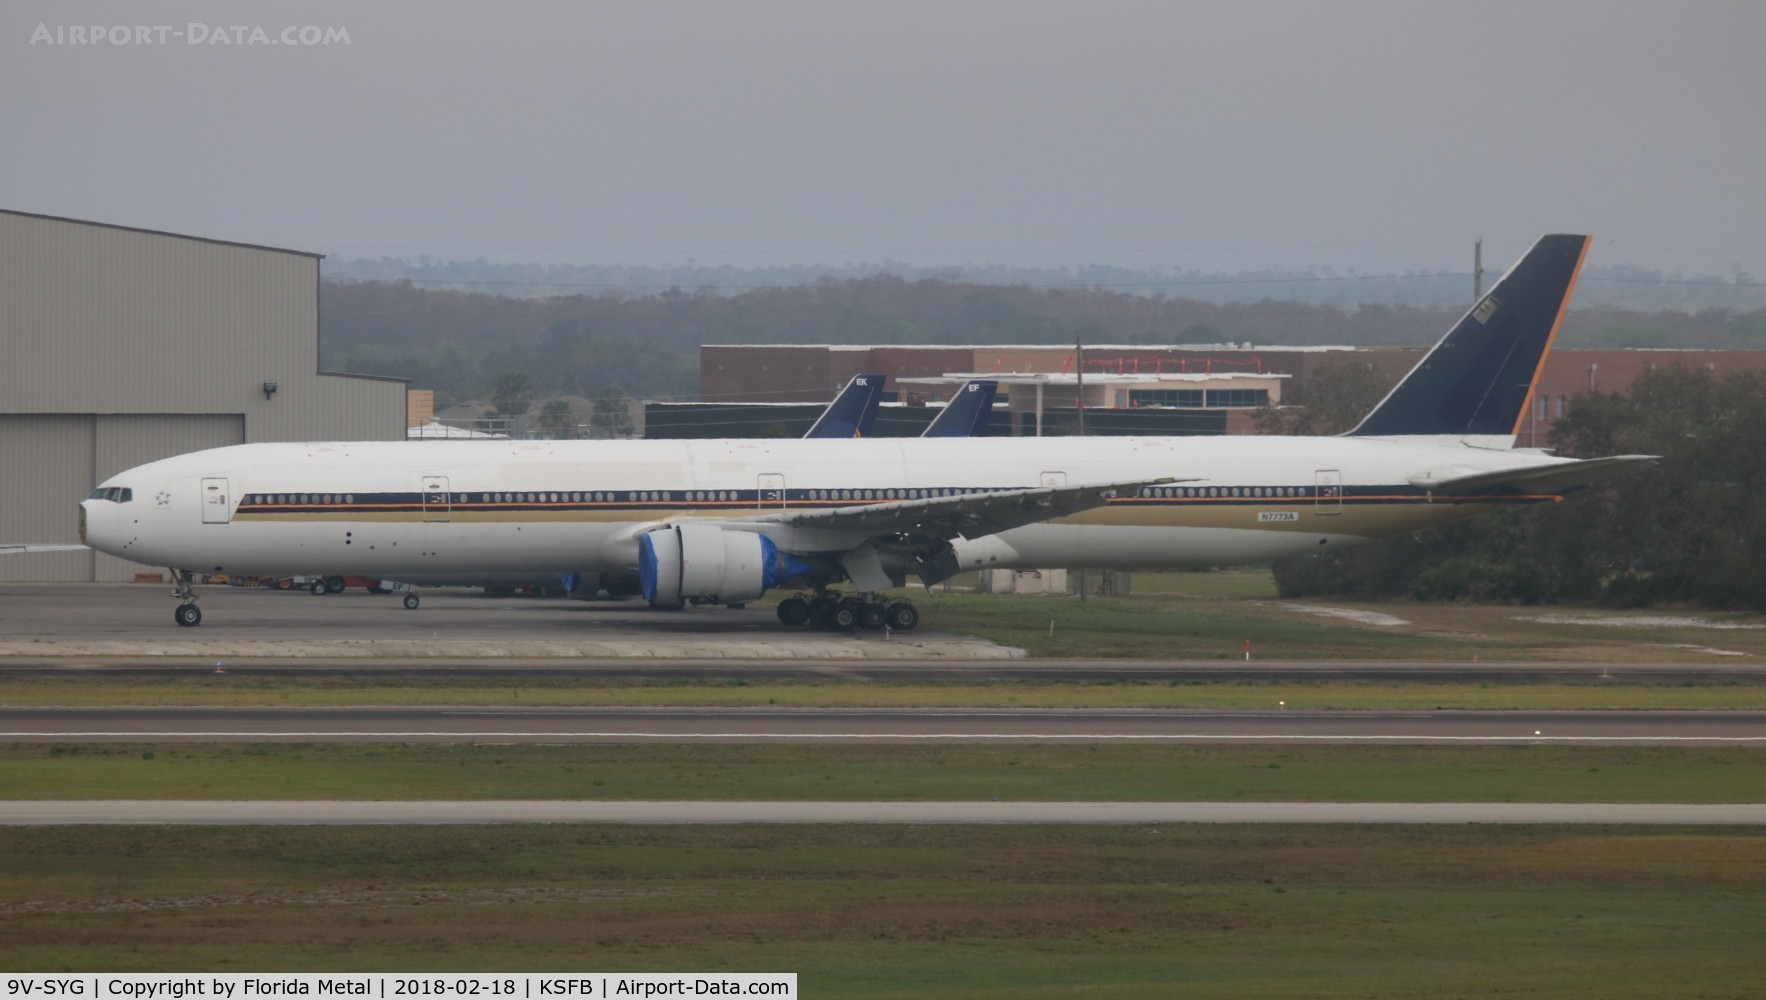 9V-SYG, 2001 Boeing 777-312 C/N 28528, Wearing a temporary tag of N7773A, Singapore Airlines